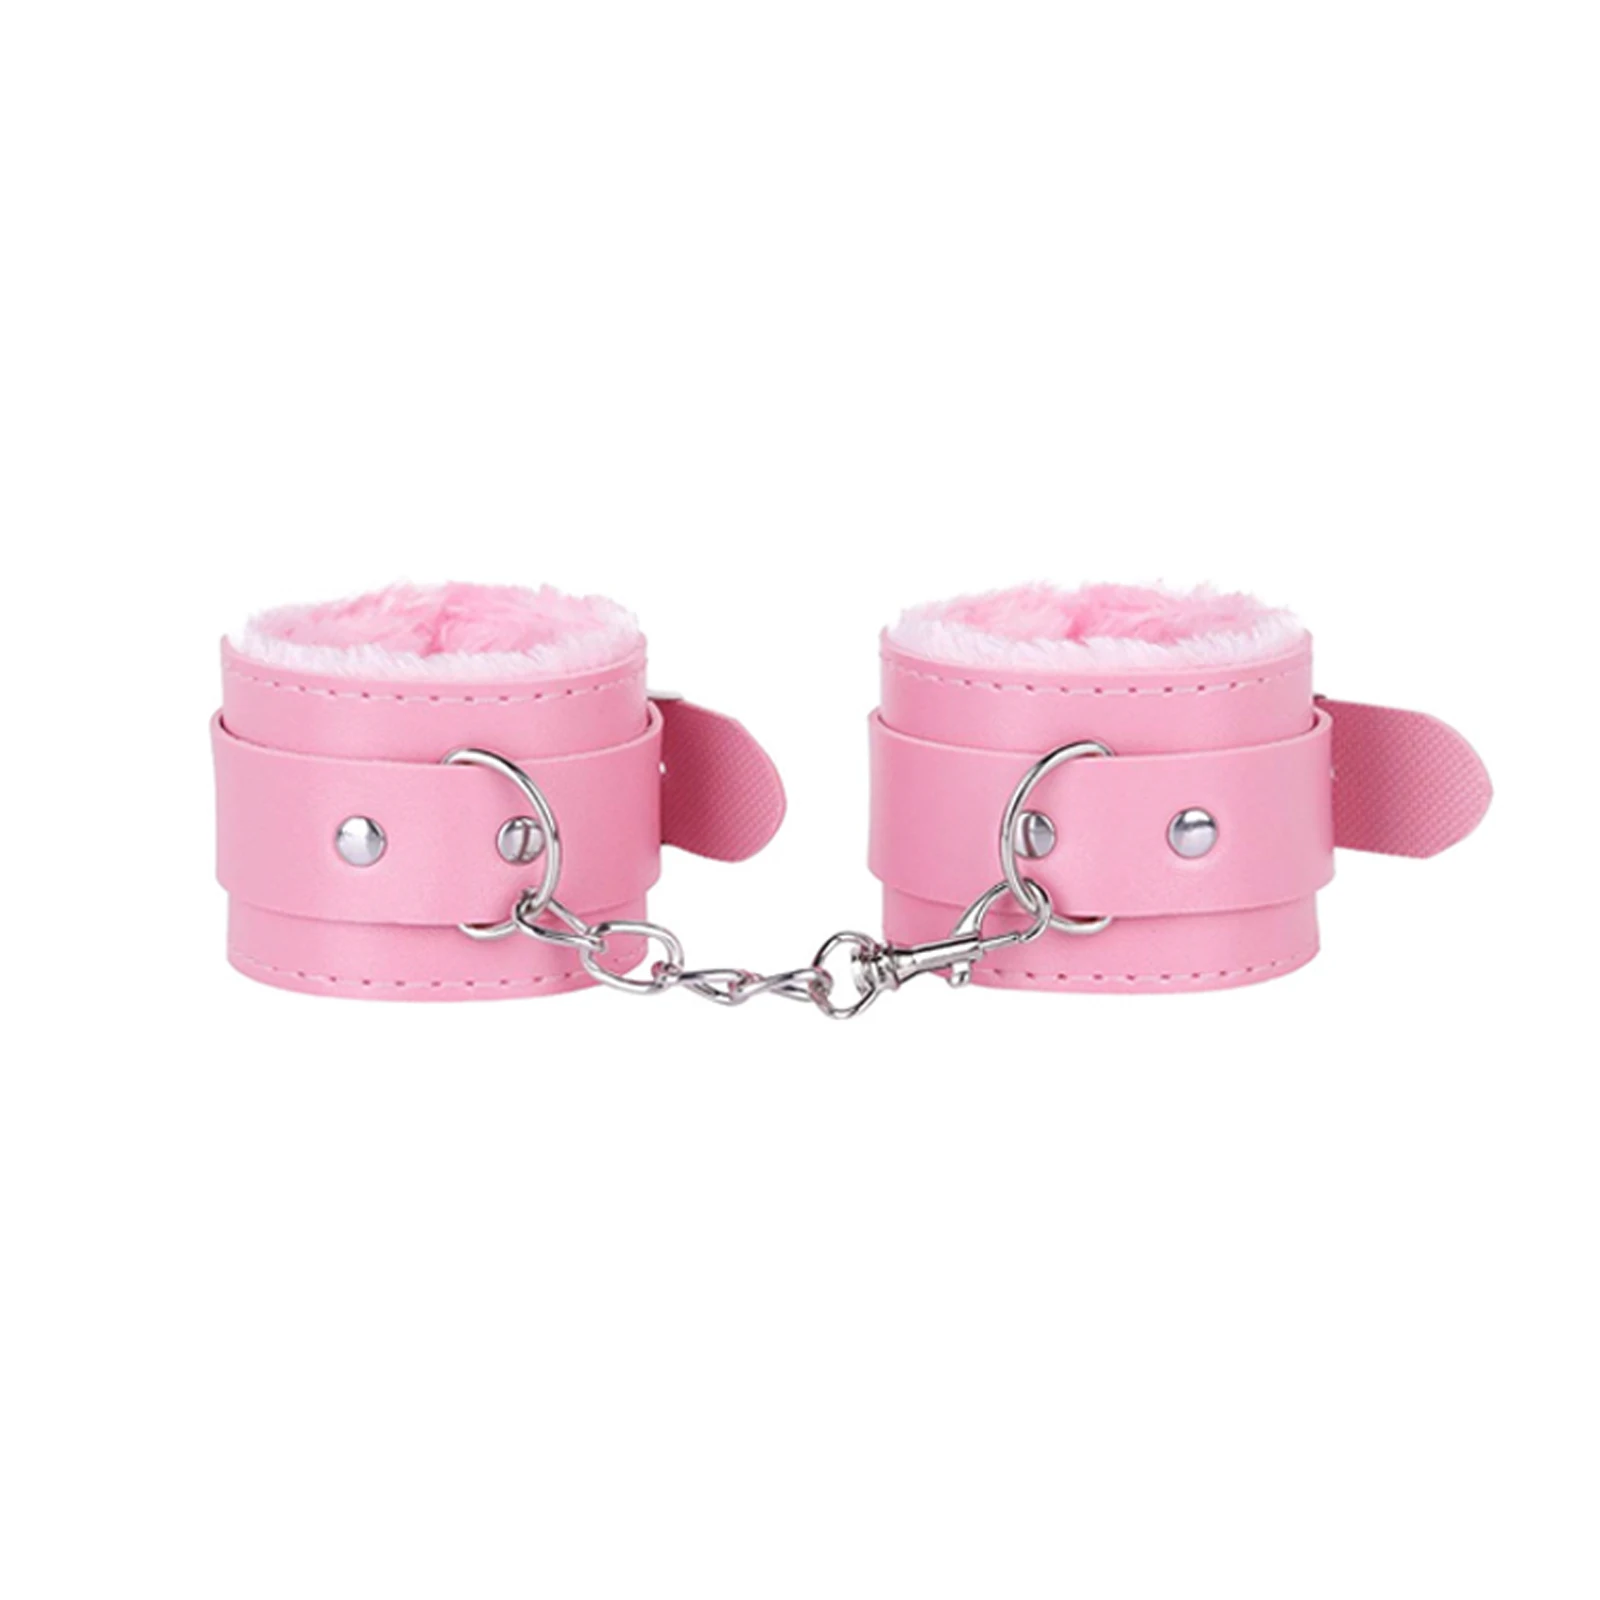 Fluffy Leather Wrist Handcuffs Bracelet Leg Ankle Cuffs Detachable Adjustable Leash Chain for Women Cosplay Party Costume Jewelry Gift